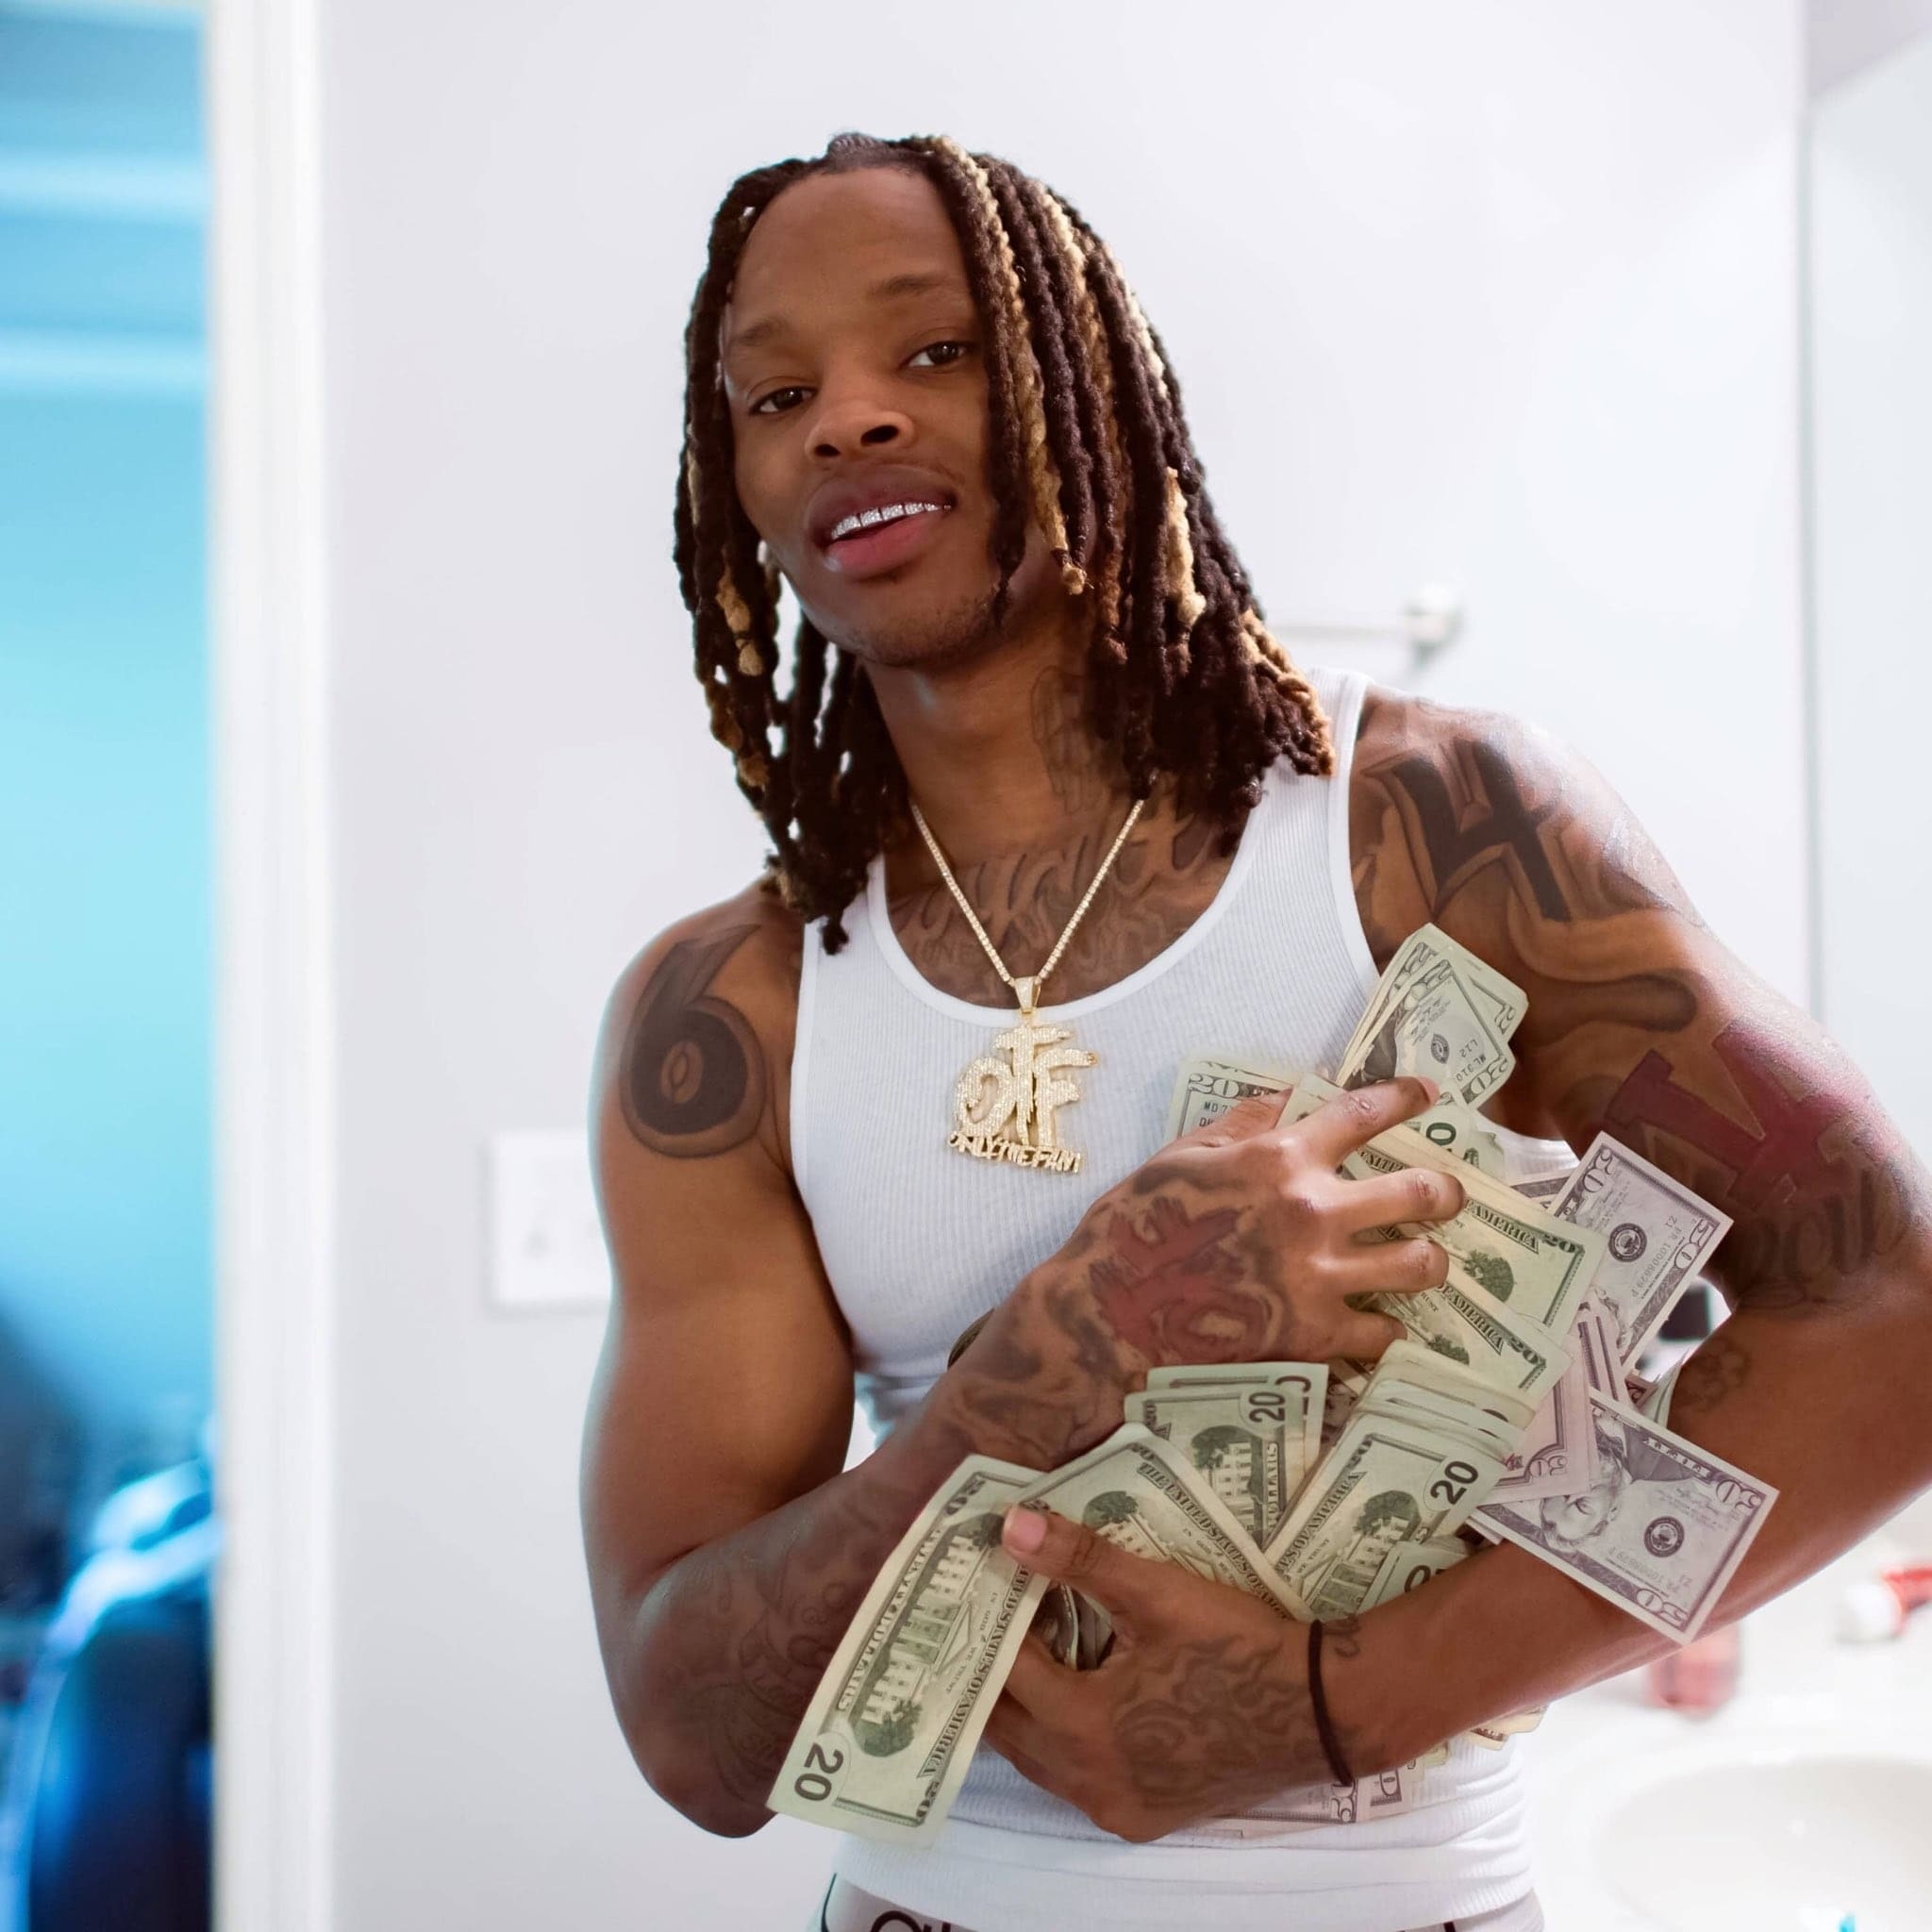 King Von and Lil Durk, Dynamic duo, HD wallpapers, 2050x2050 HD Handy